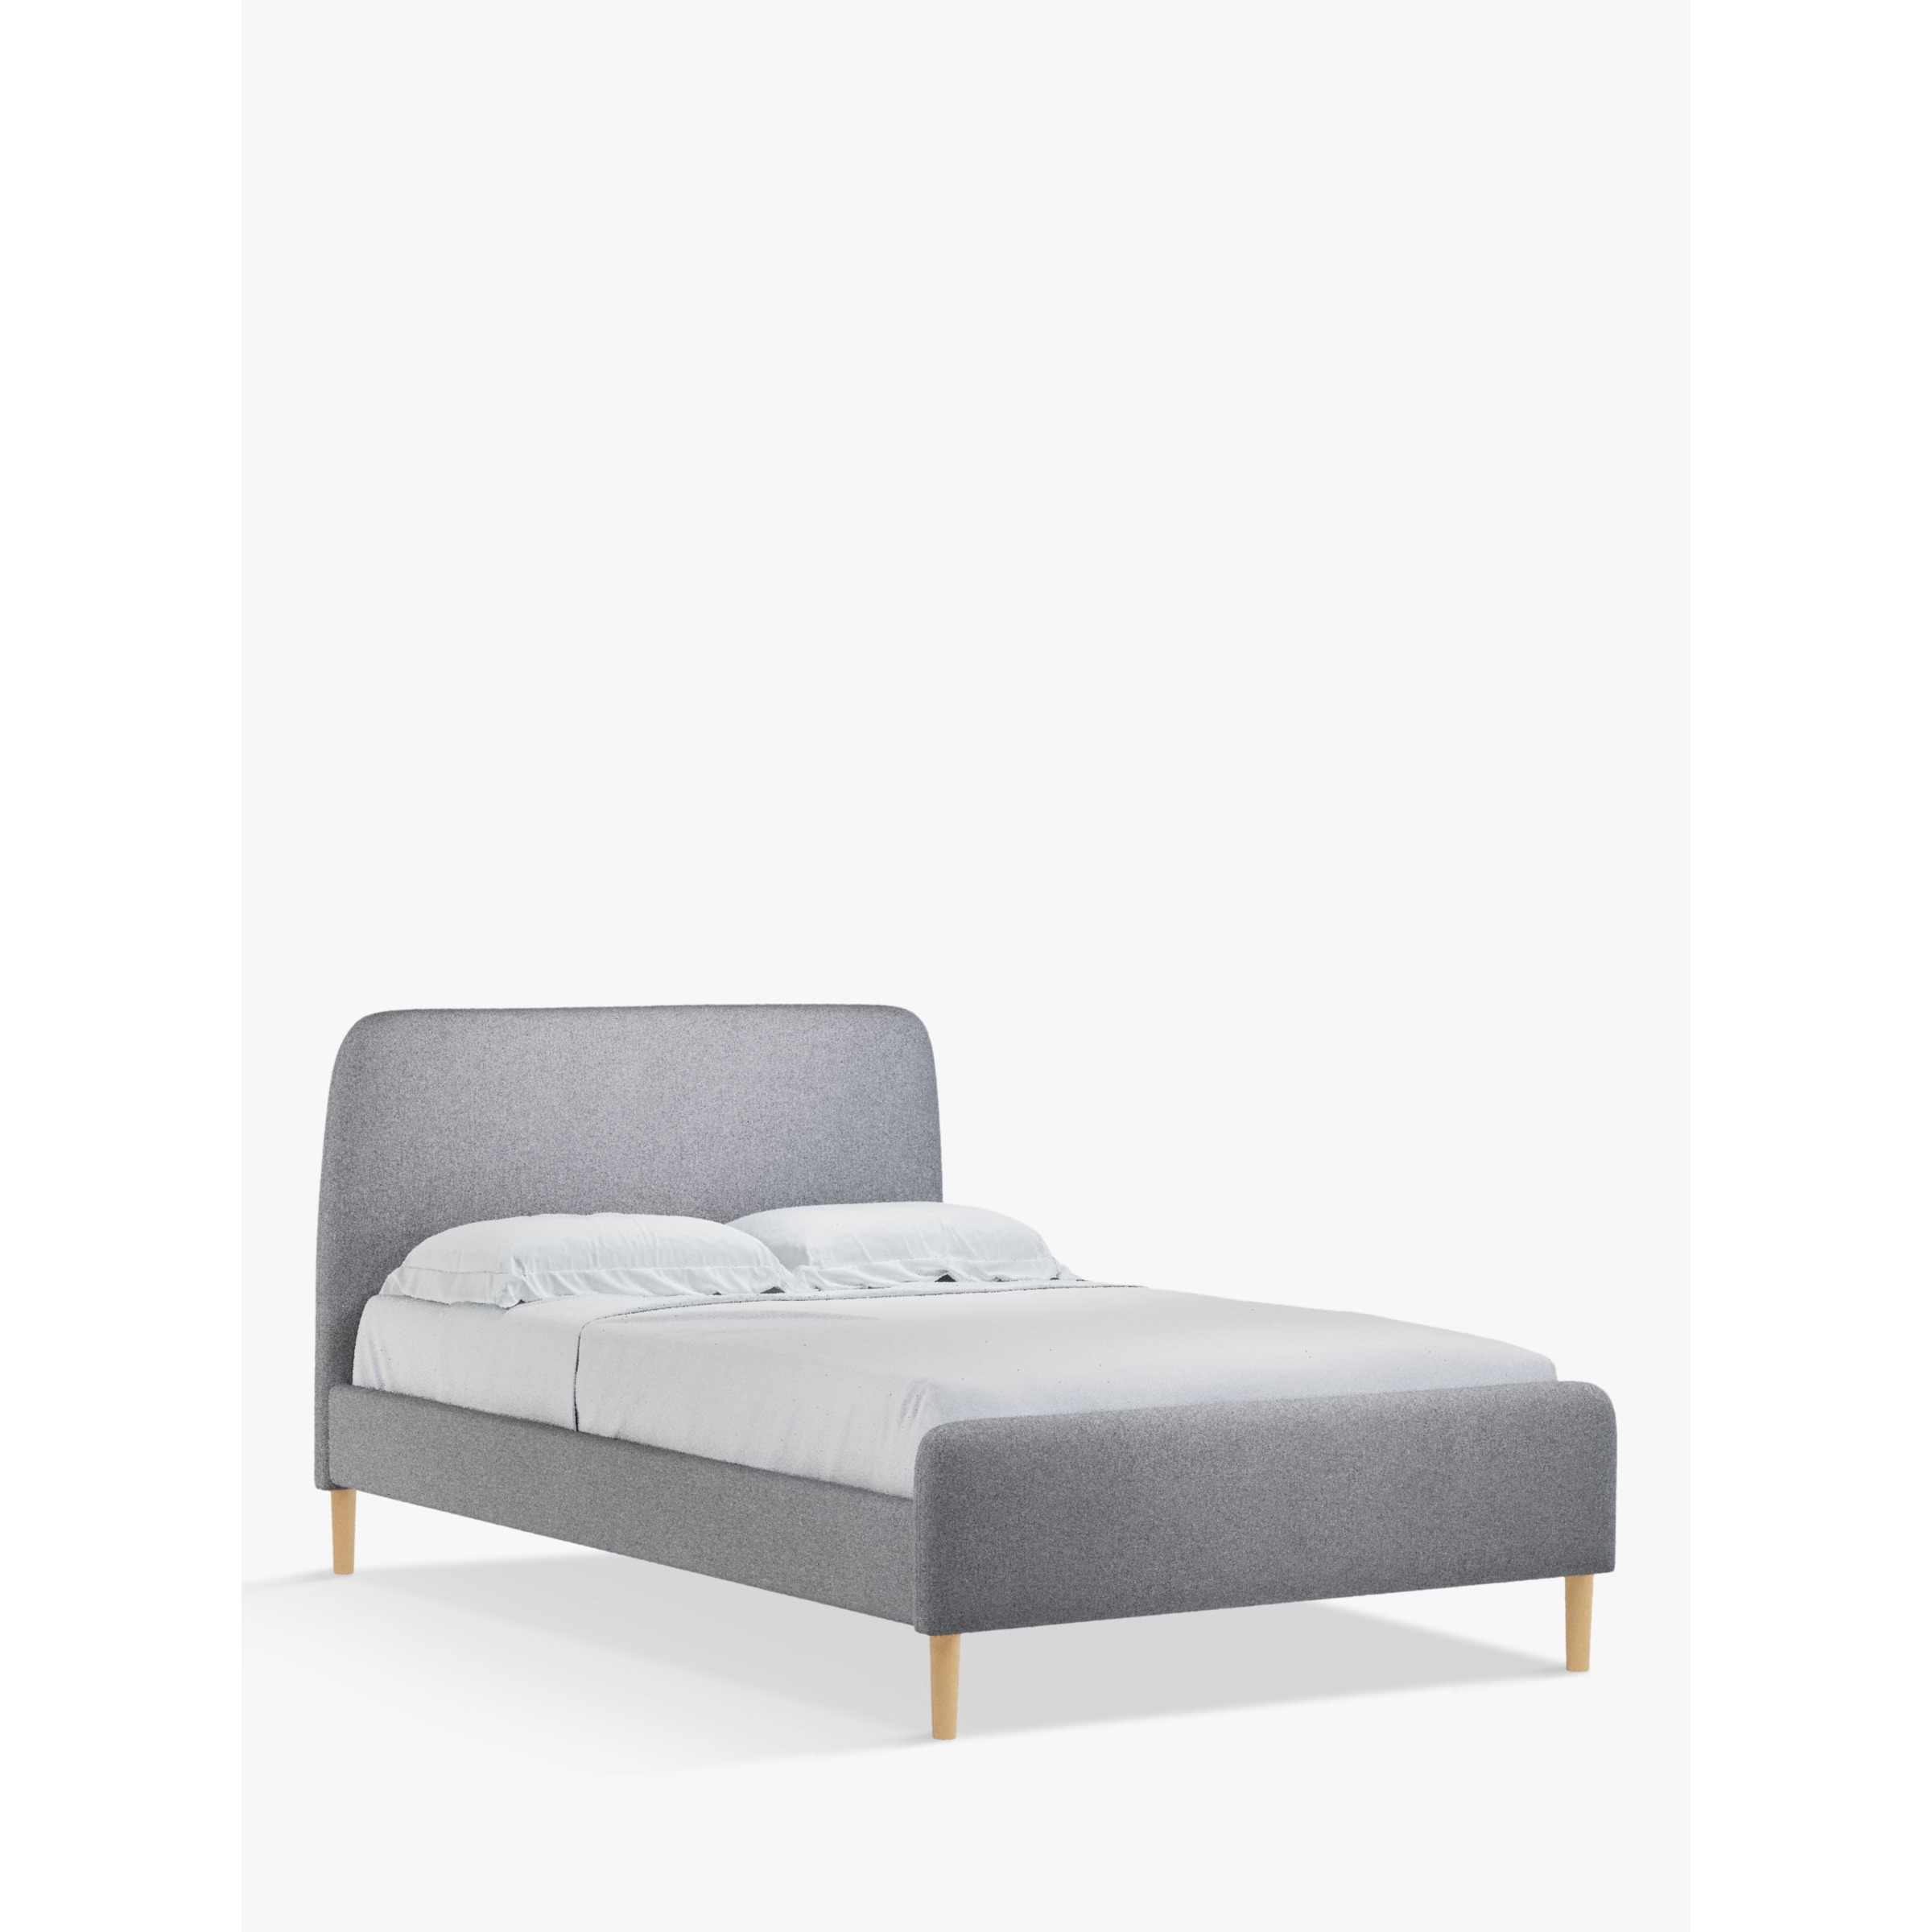 John Lewis ANYDAY Bonn Upholstered Bed Frame, Small Double - image 1